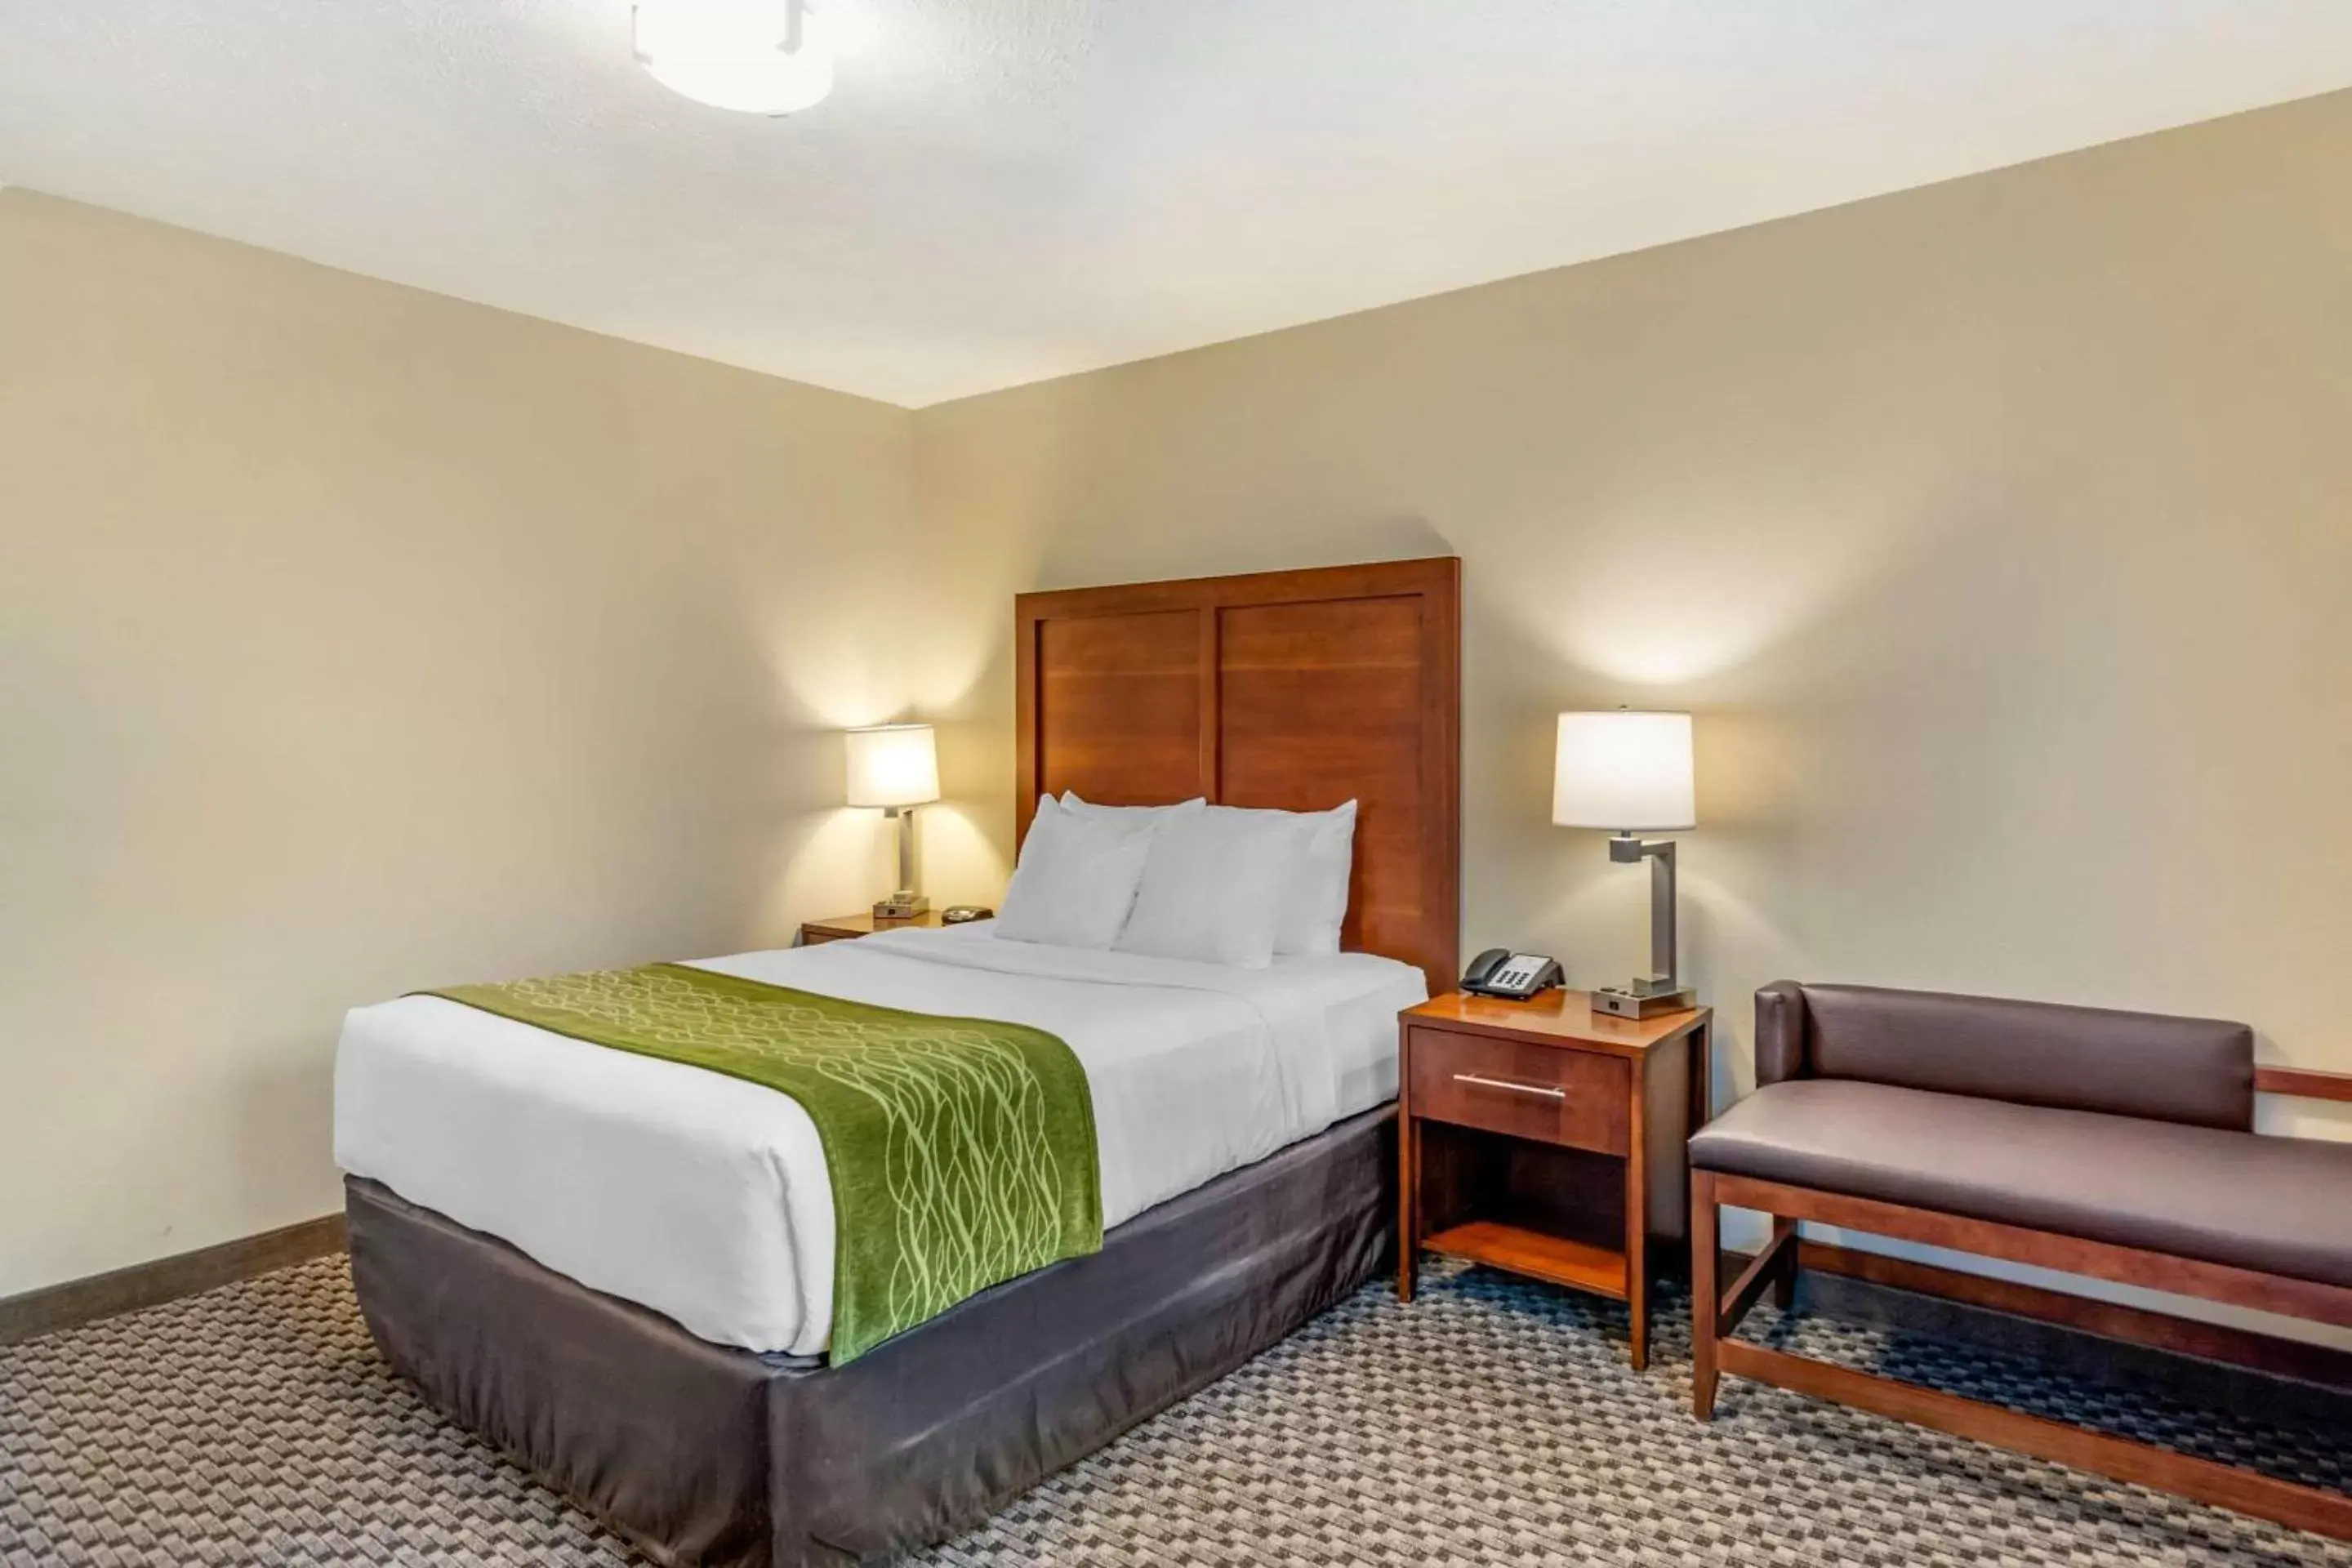 Accessible Queen Room with Roll In Shower - Non Smoking in Comfort Inn & Suites Lancaster Antelope Valley